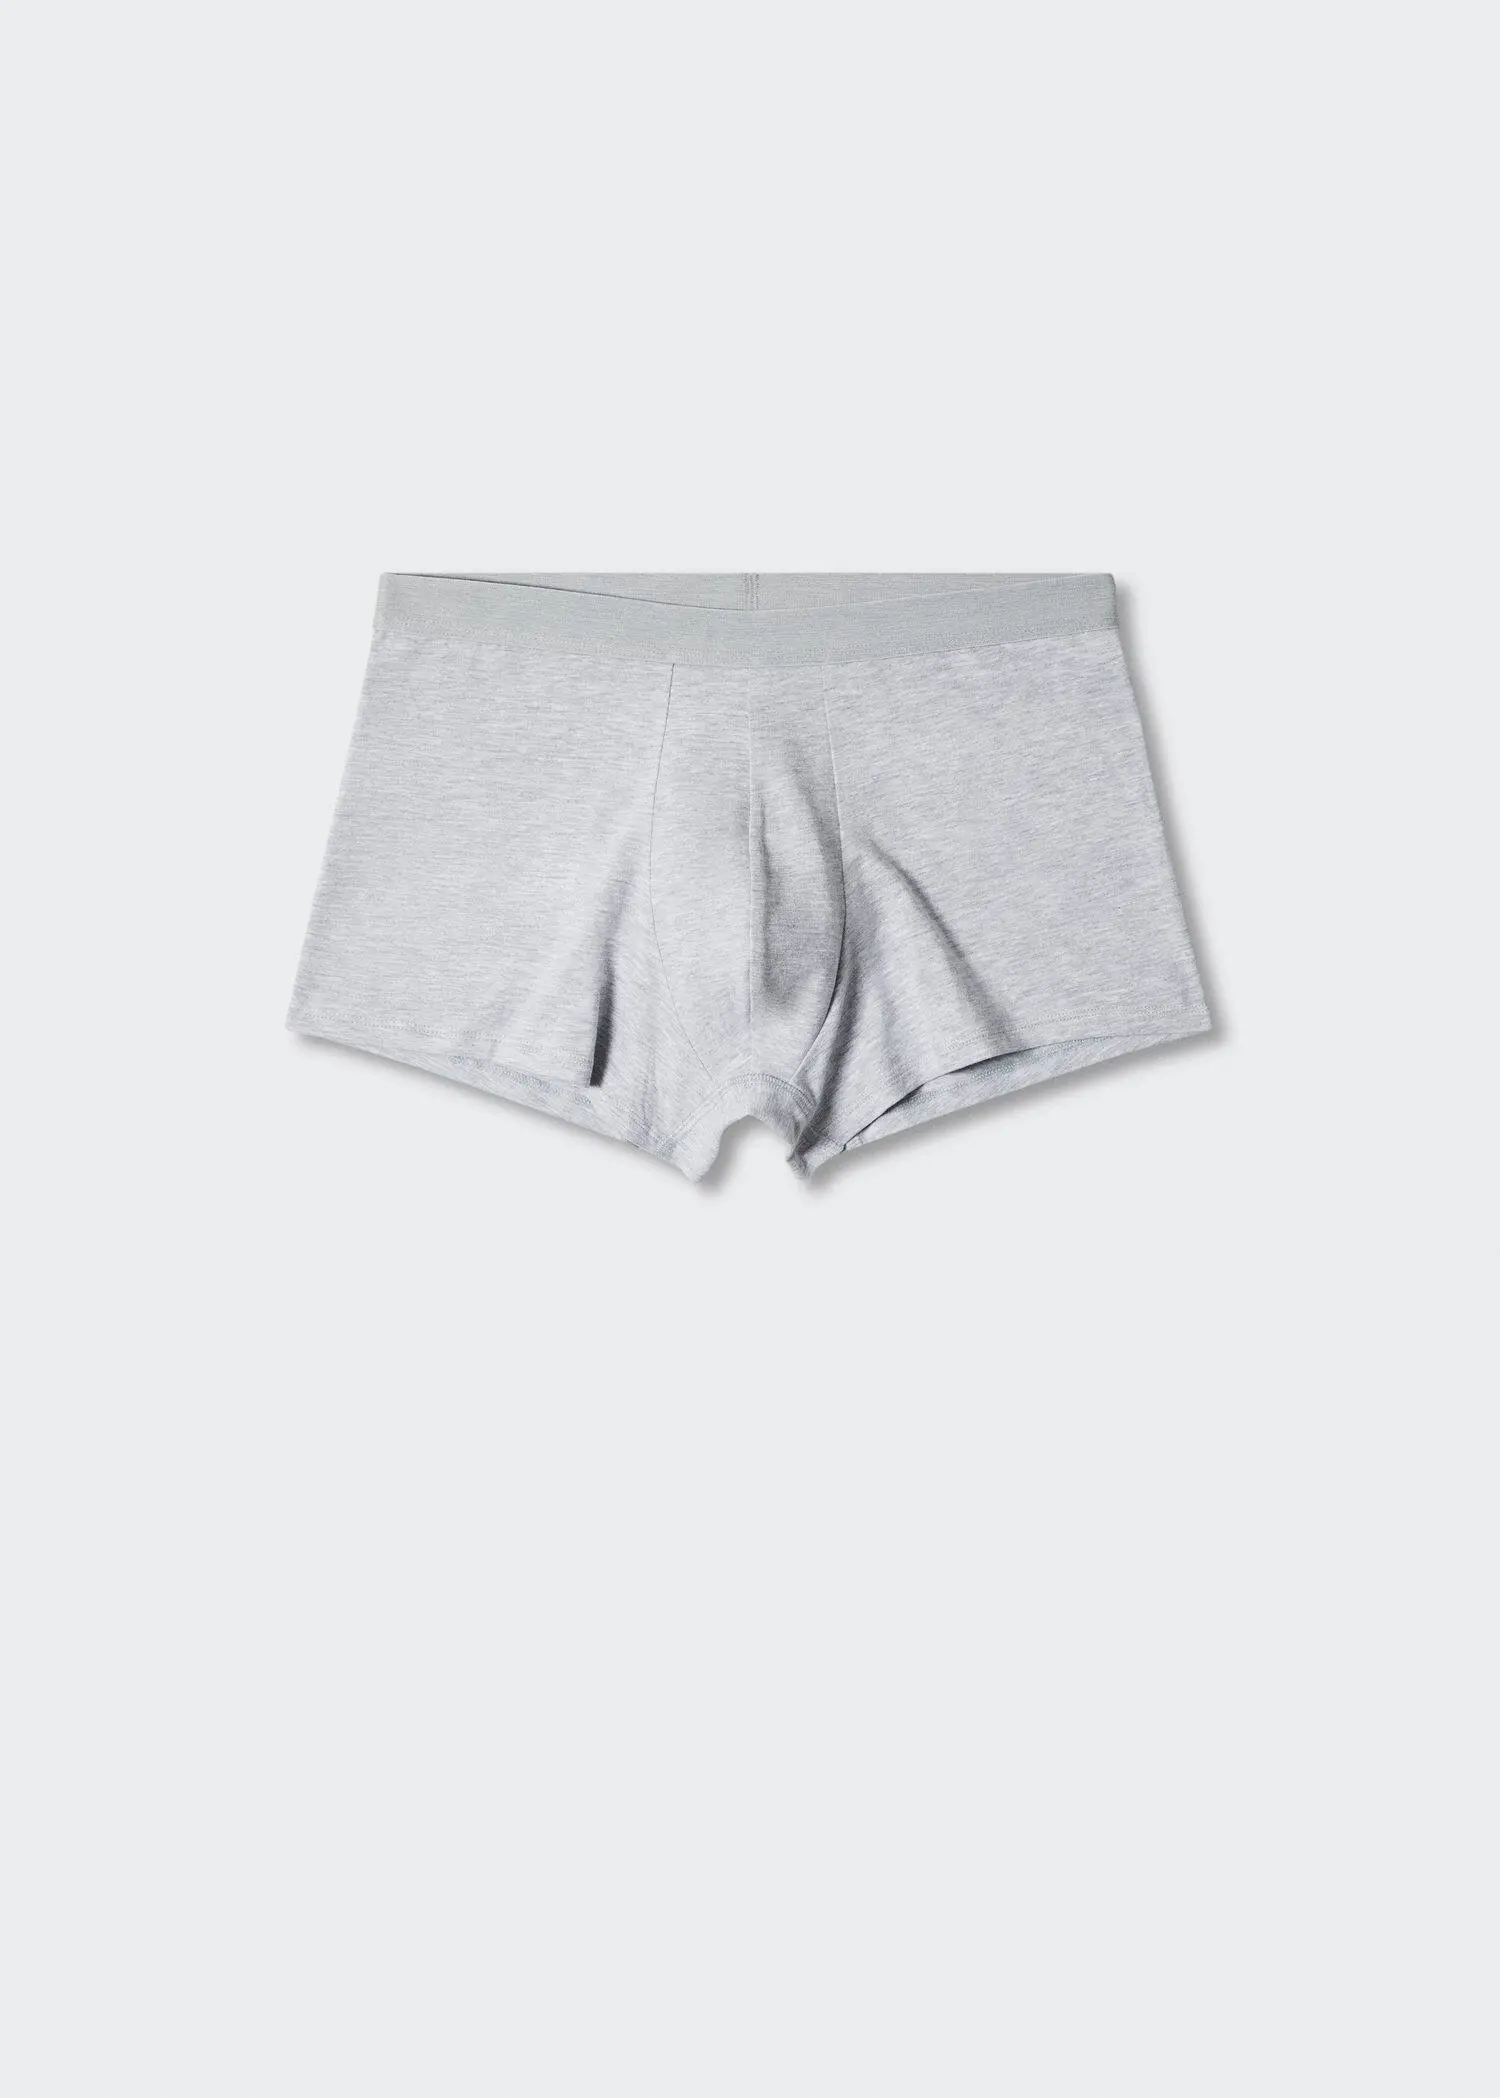 Mango 3-pack cotton boxers. a pair of white shorts with an elastic waist band. 